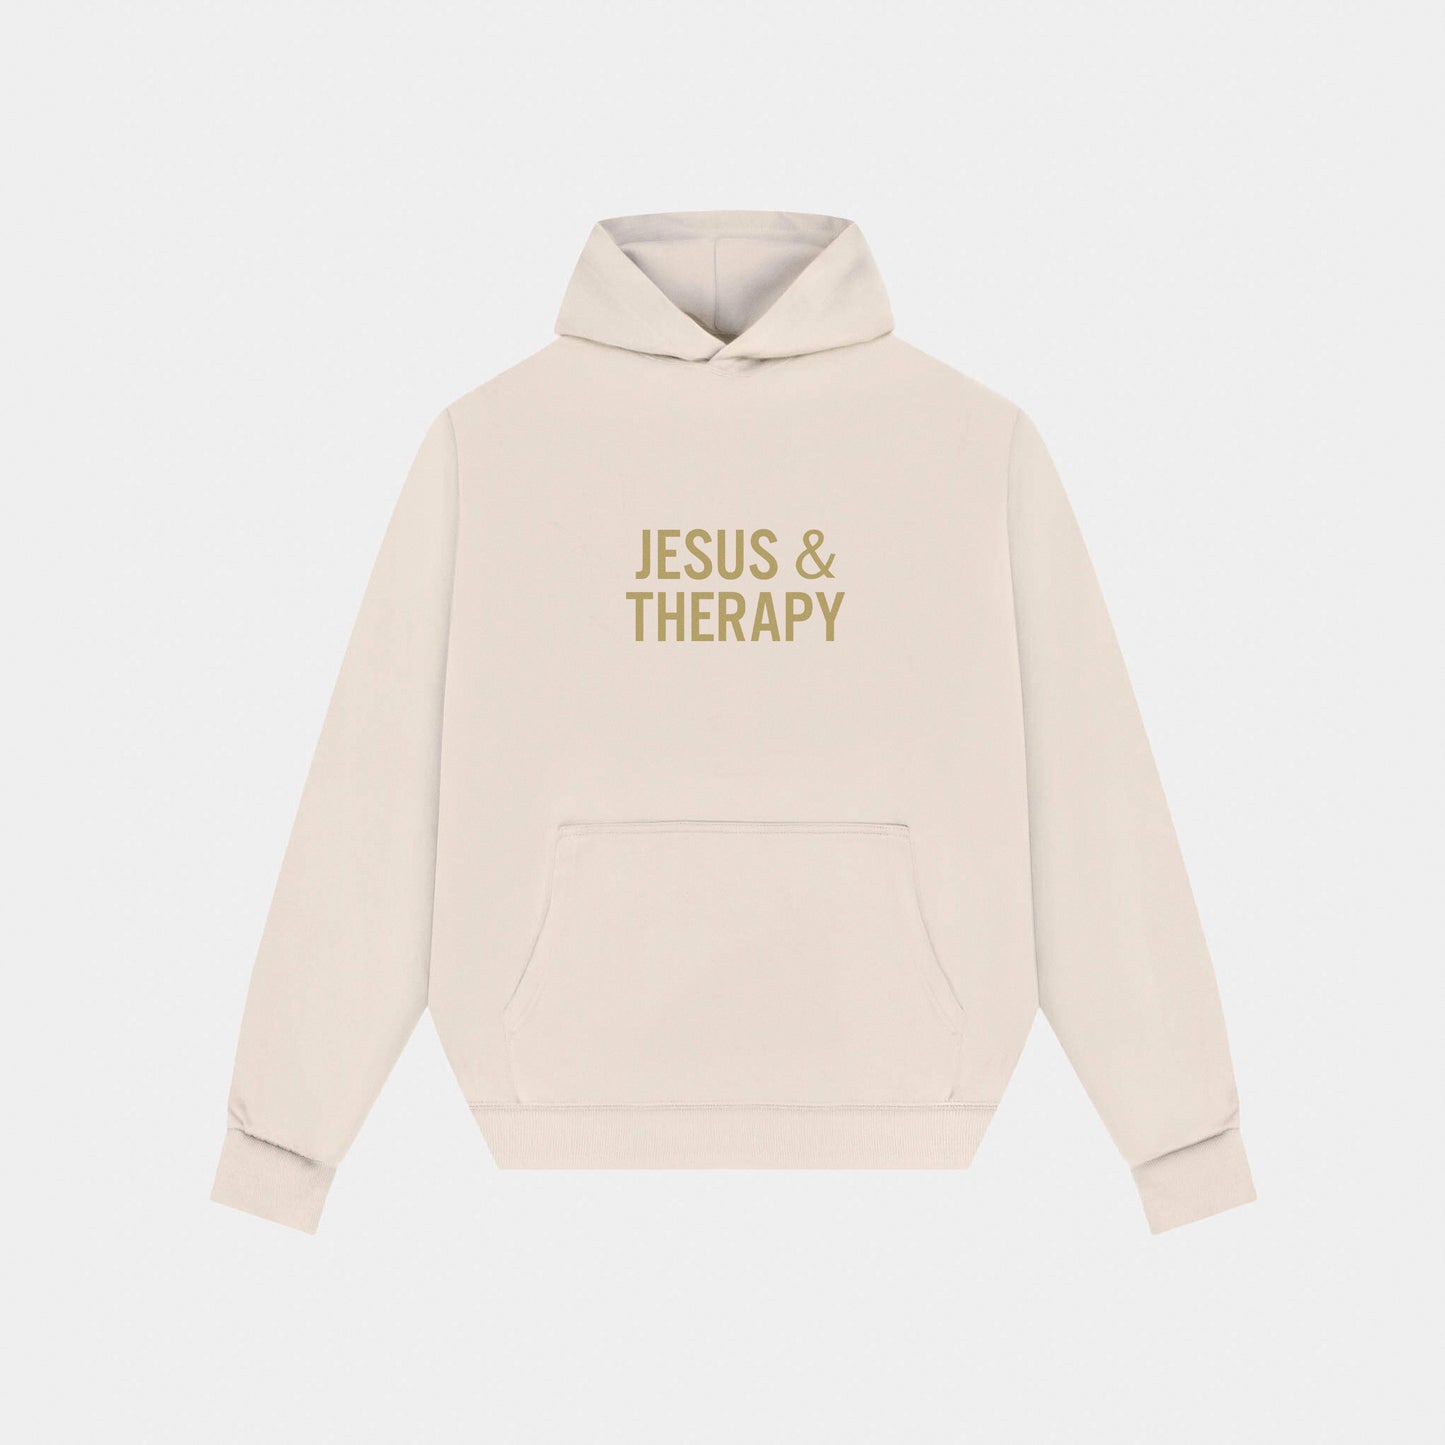 Jesus & Therapy Hoodie || Sandshell